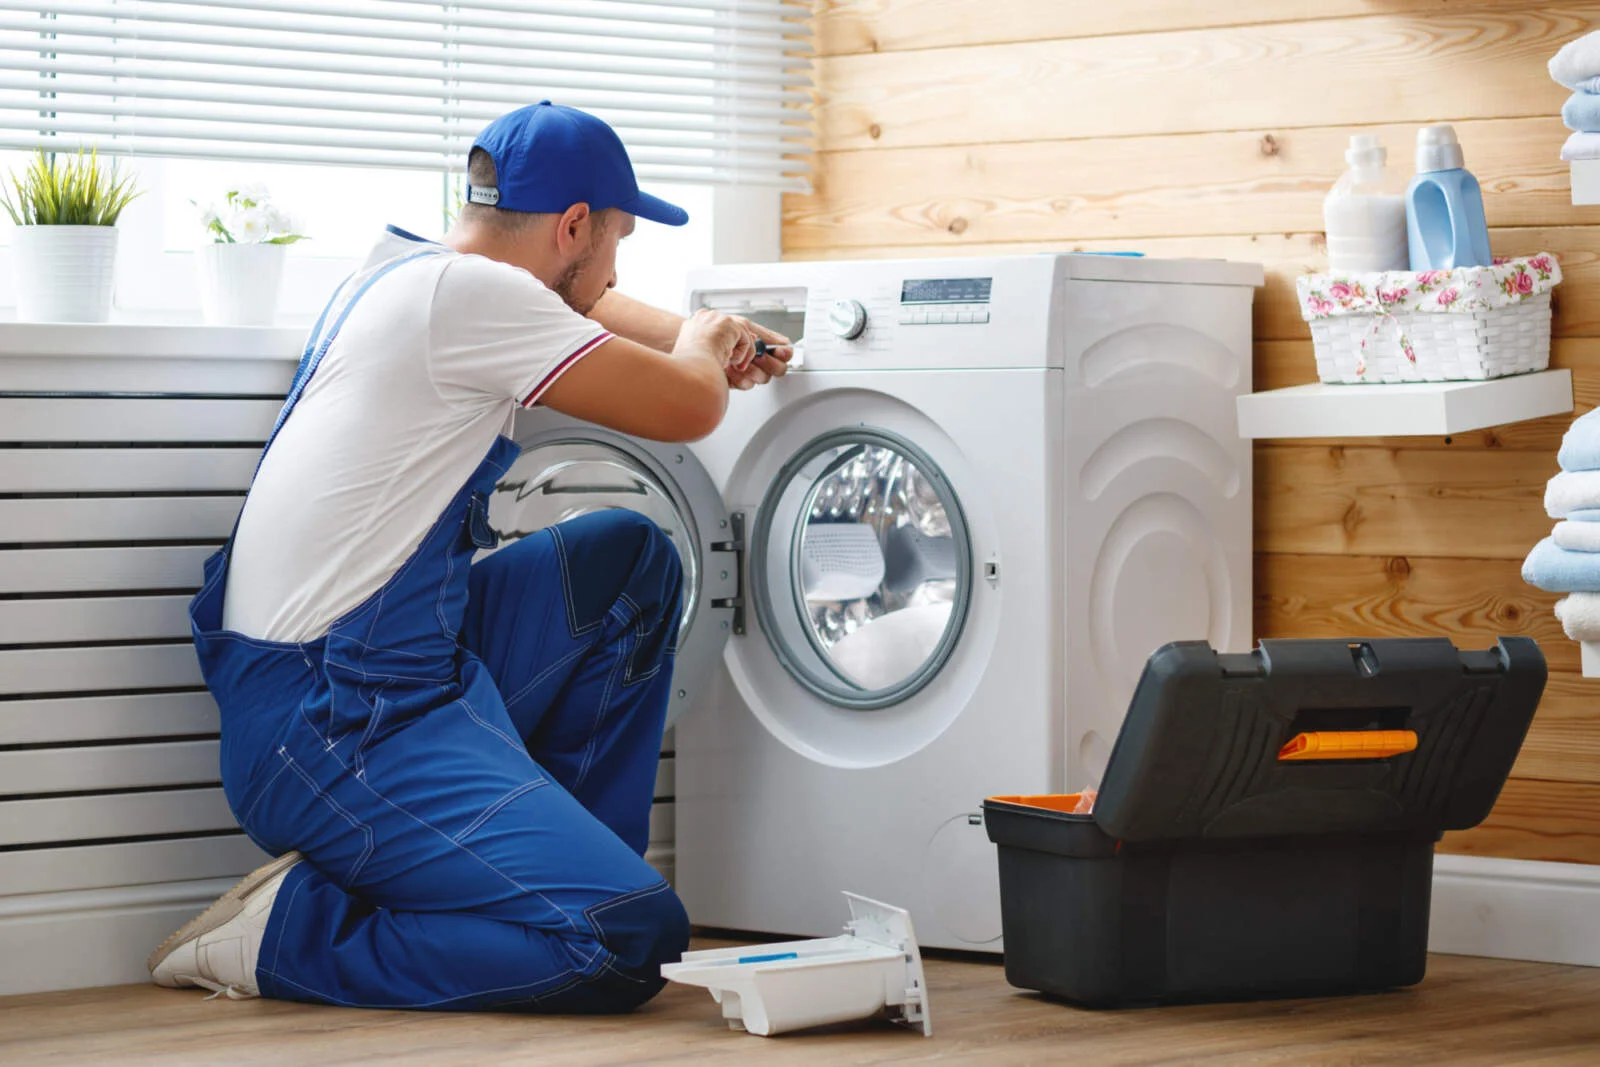 What To Charge For An Appliance Home Repair Visit